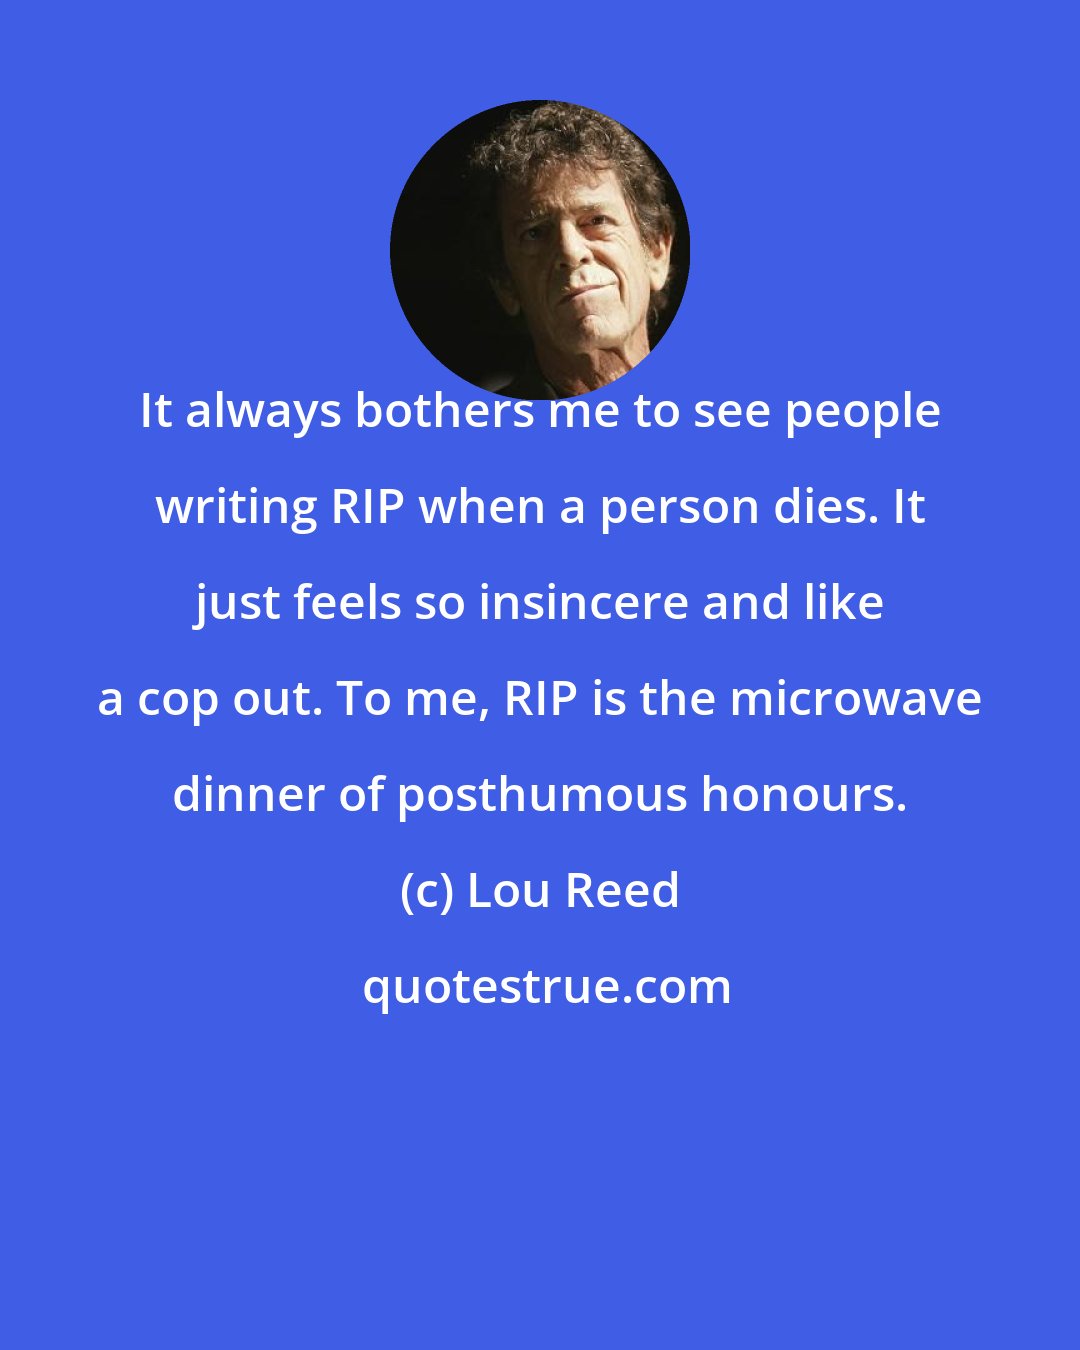 Lou Reed: It always bothers me to see people writing RIP when a person dies. It just feels so insincere and like a cop out. To me, RIP is the microwave dinner of posthumous honours.